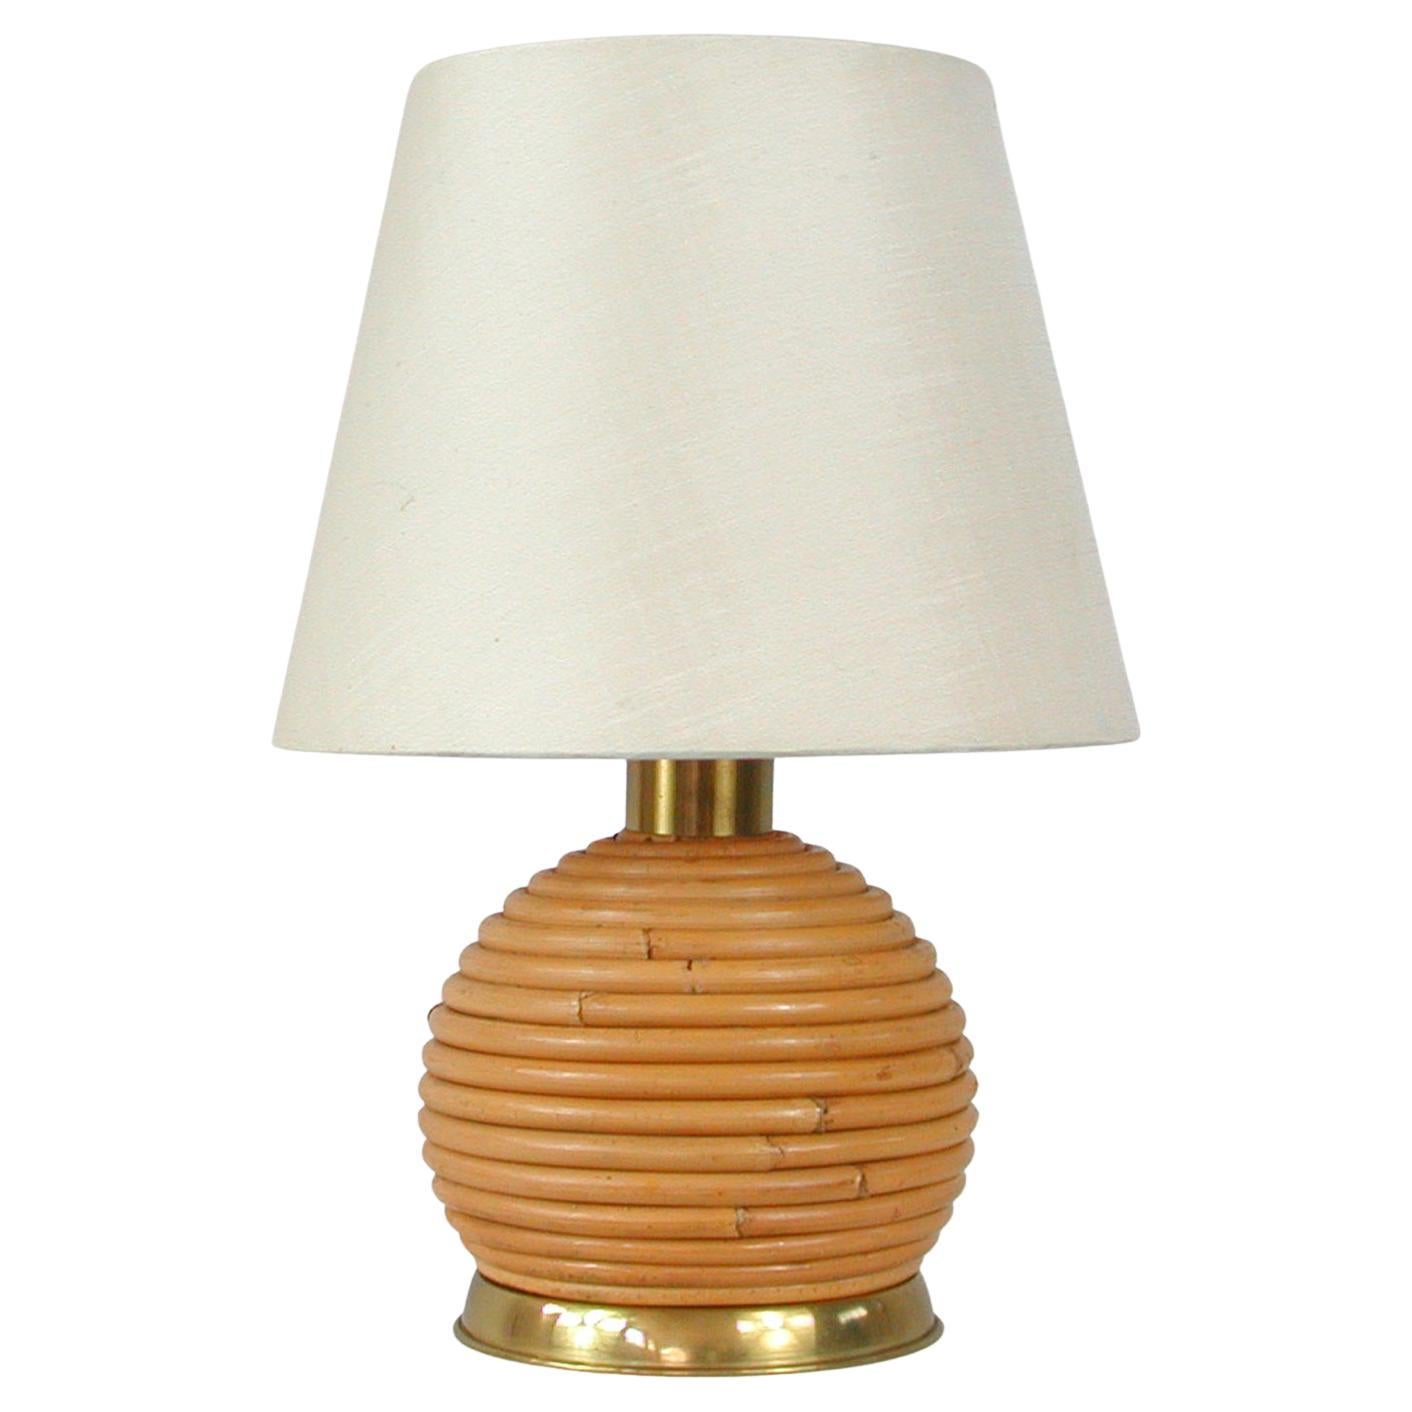 Swedish Midcentury Wicker and Brass Globe Table Lamp, 1960s For Sale